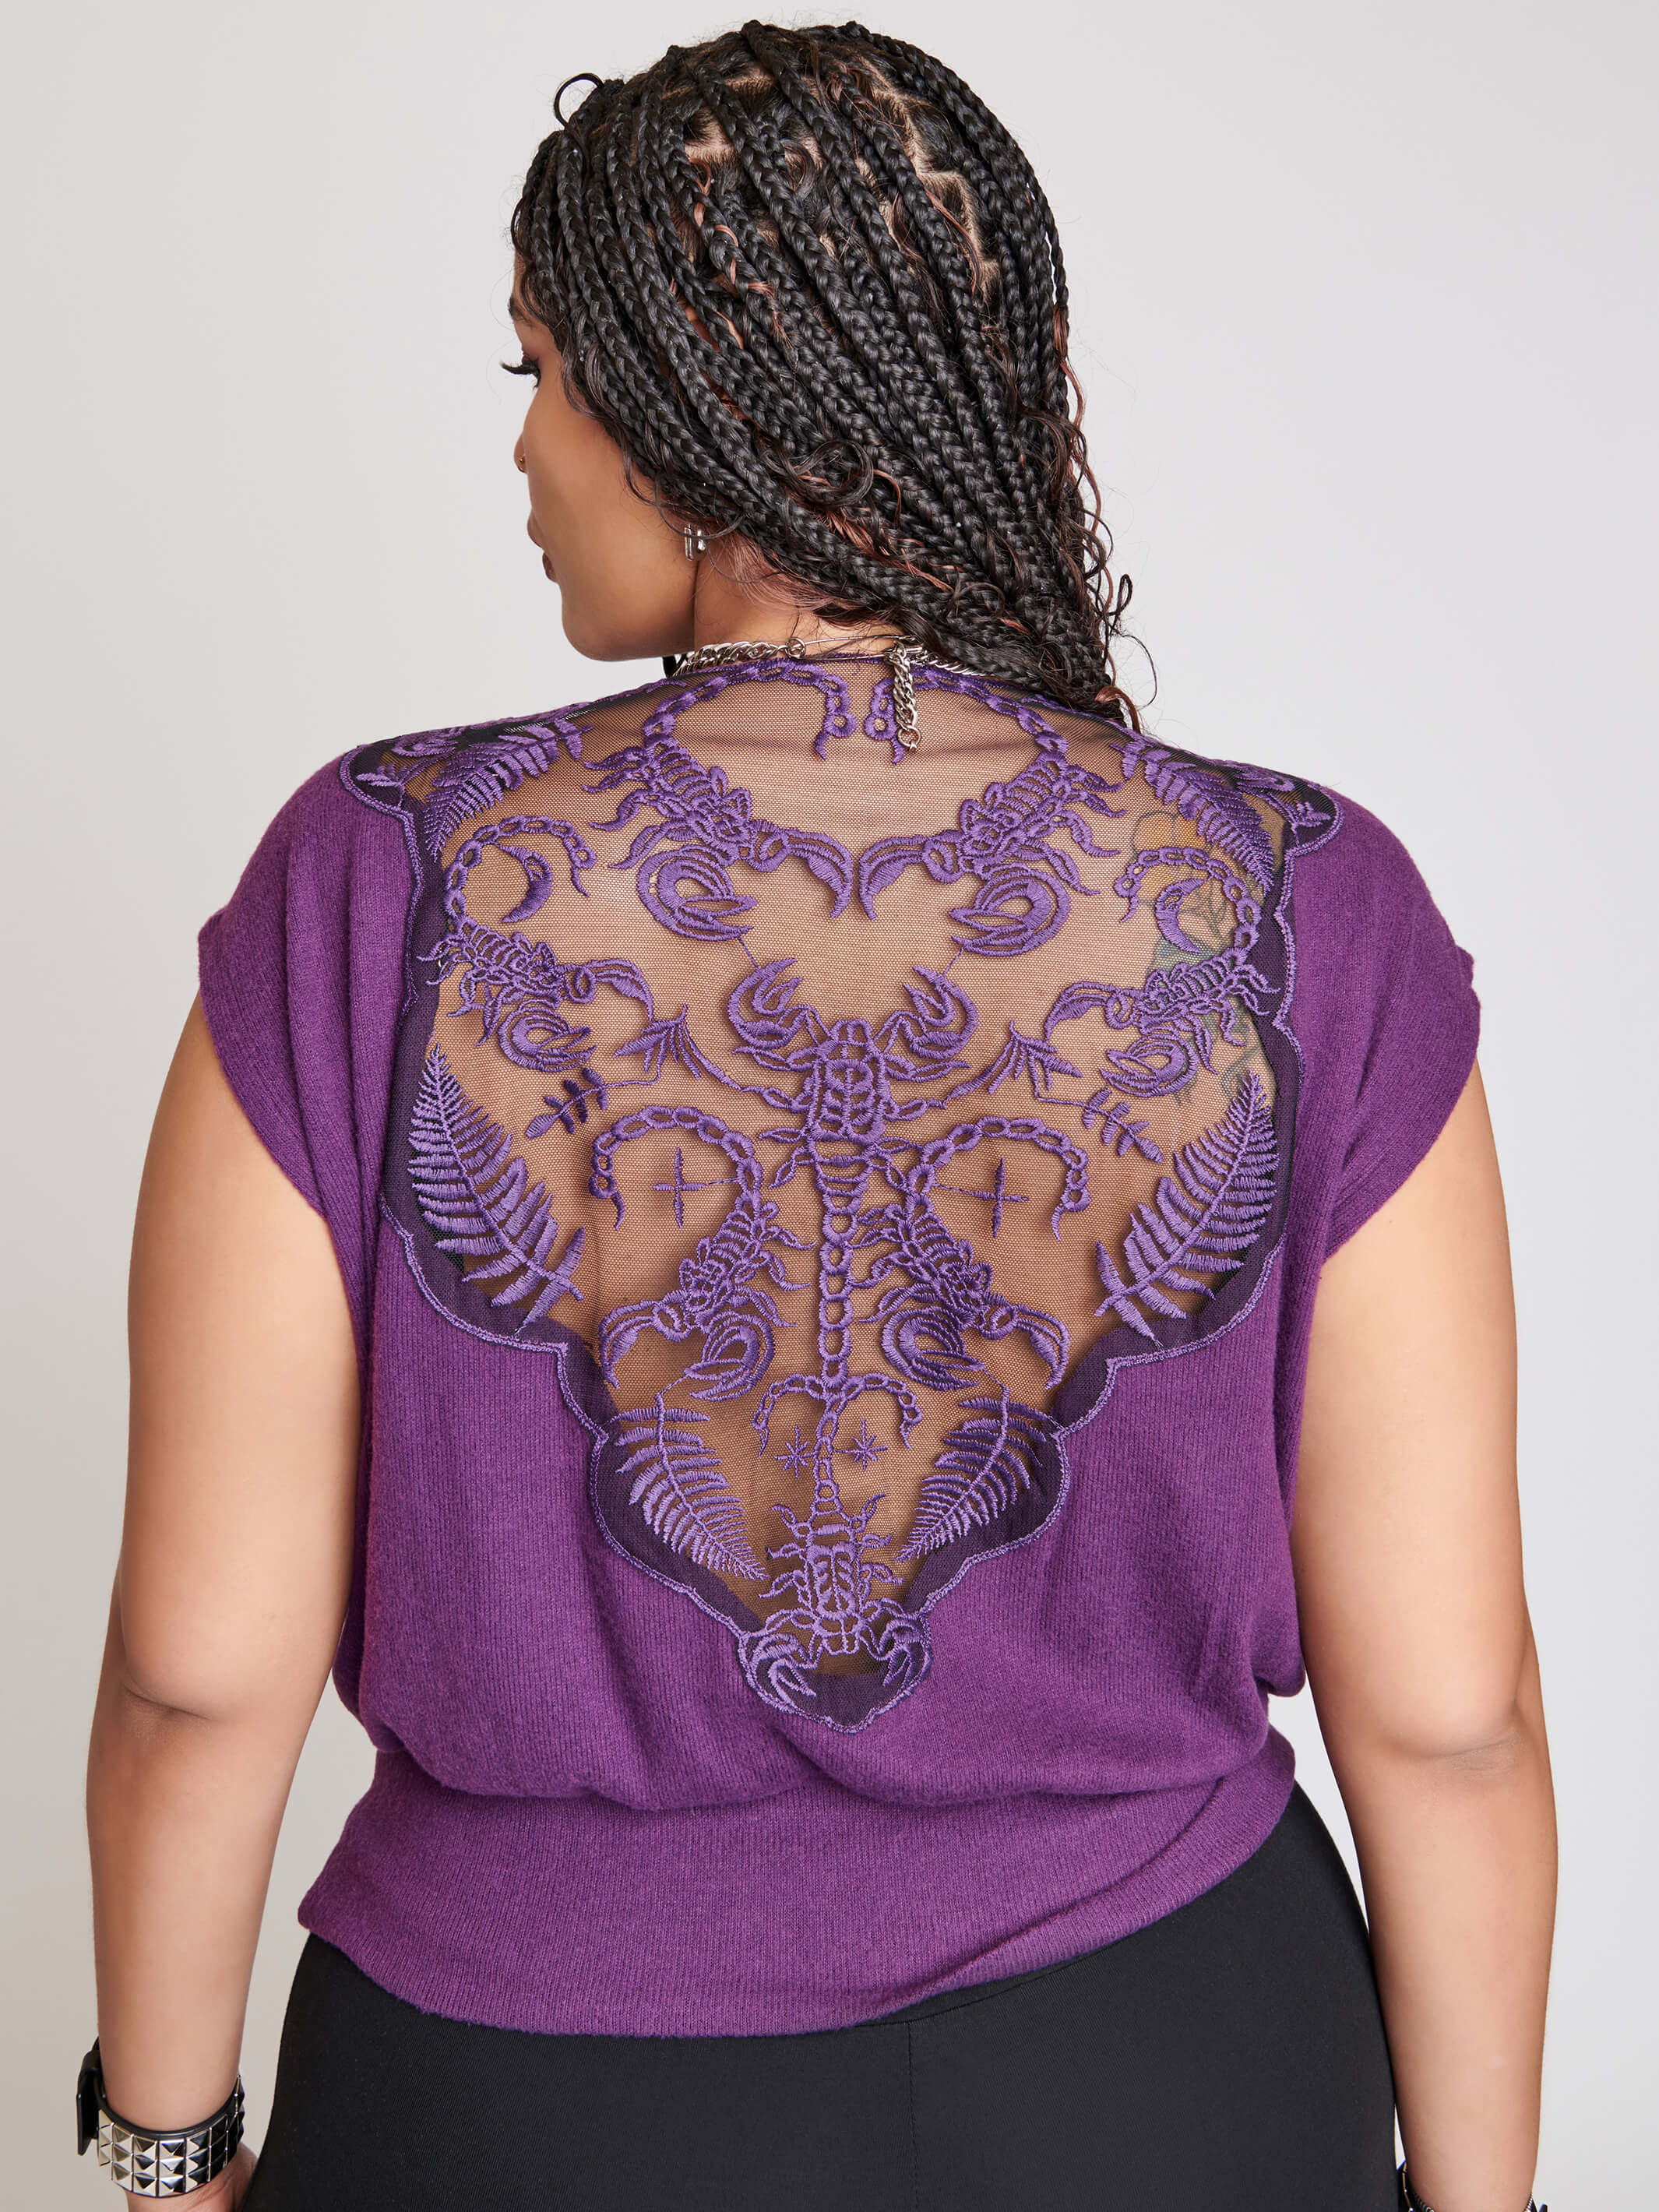 PURPLE SCORPION EMBROIDERED sweater TOP